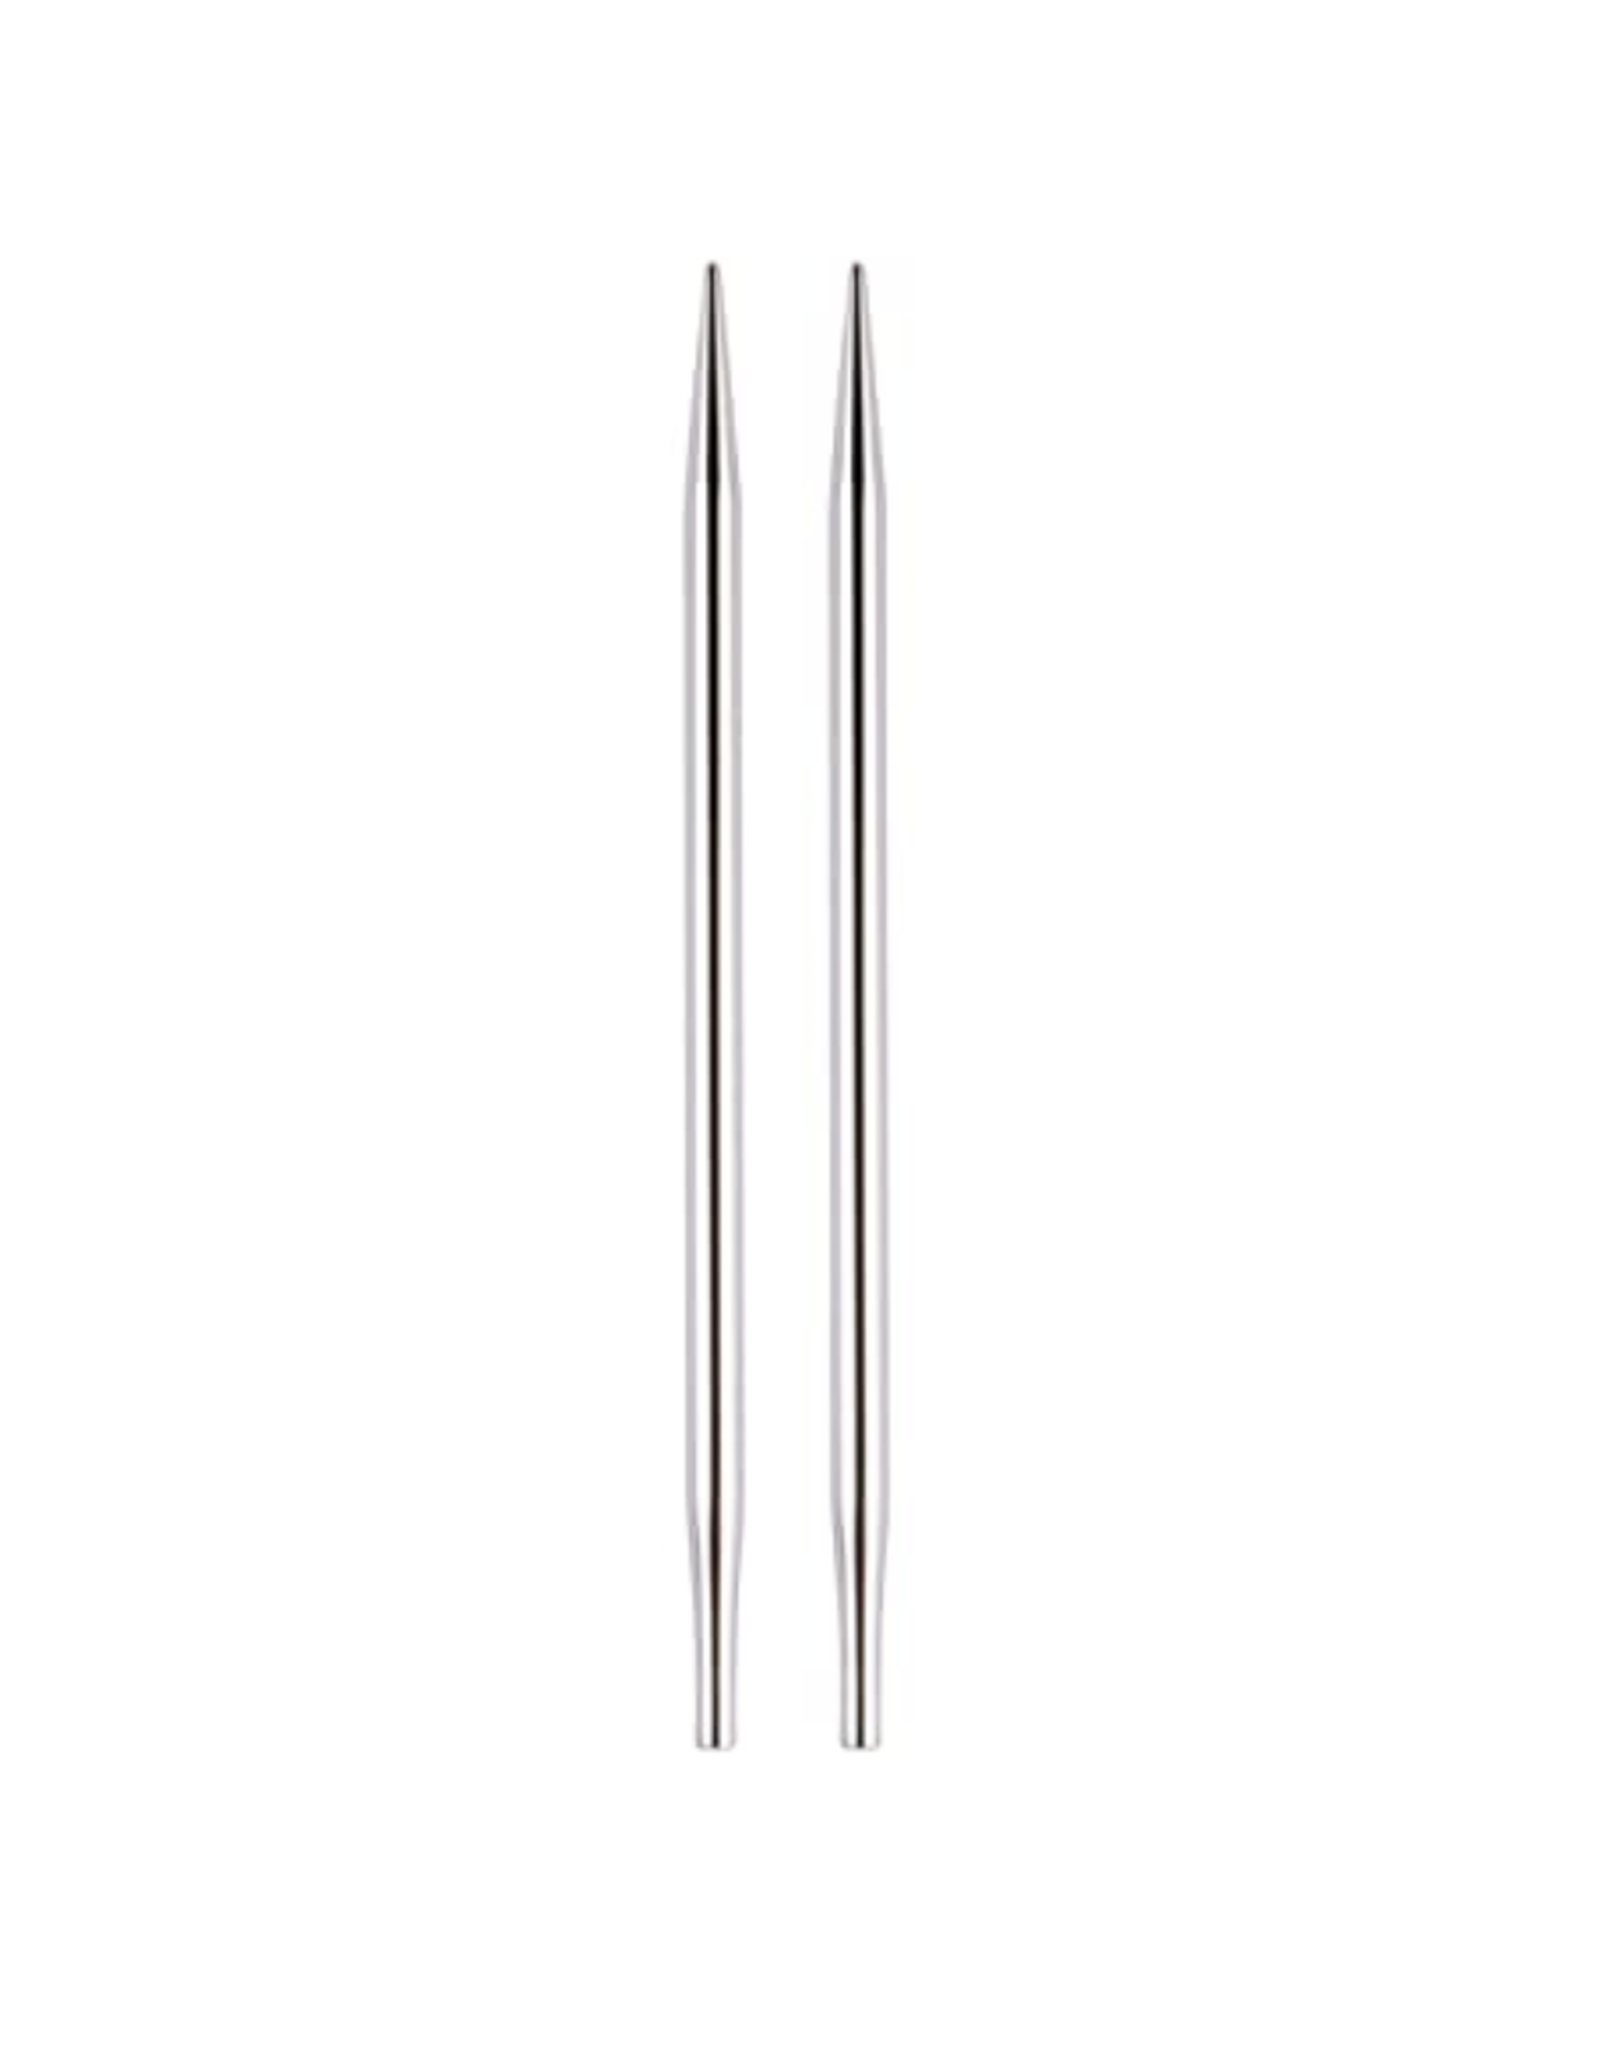 Nova size US 13 interchangeable needle tips for 24" cords and up.